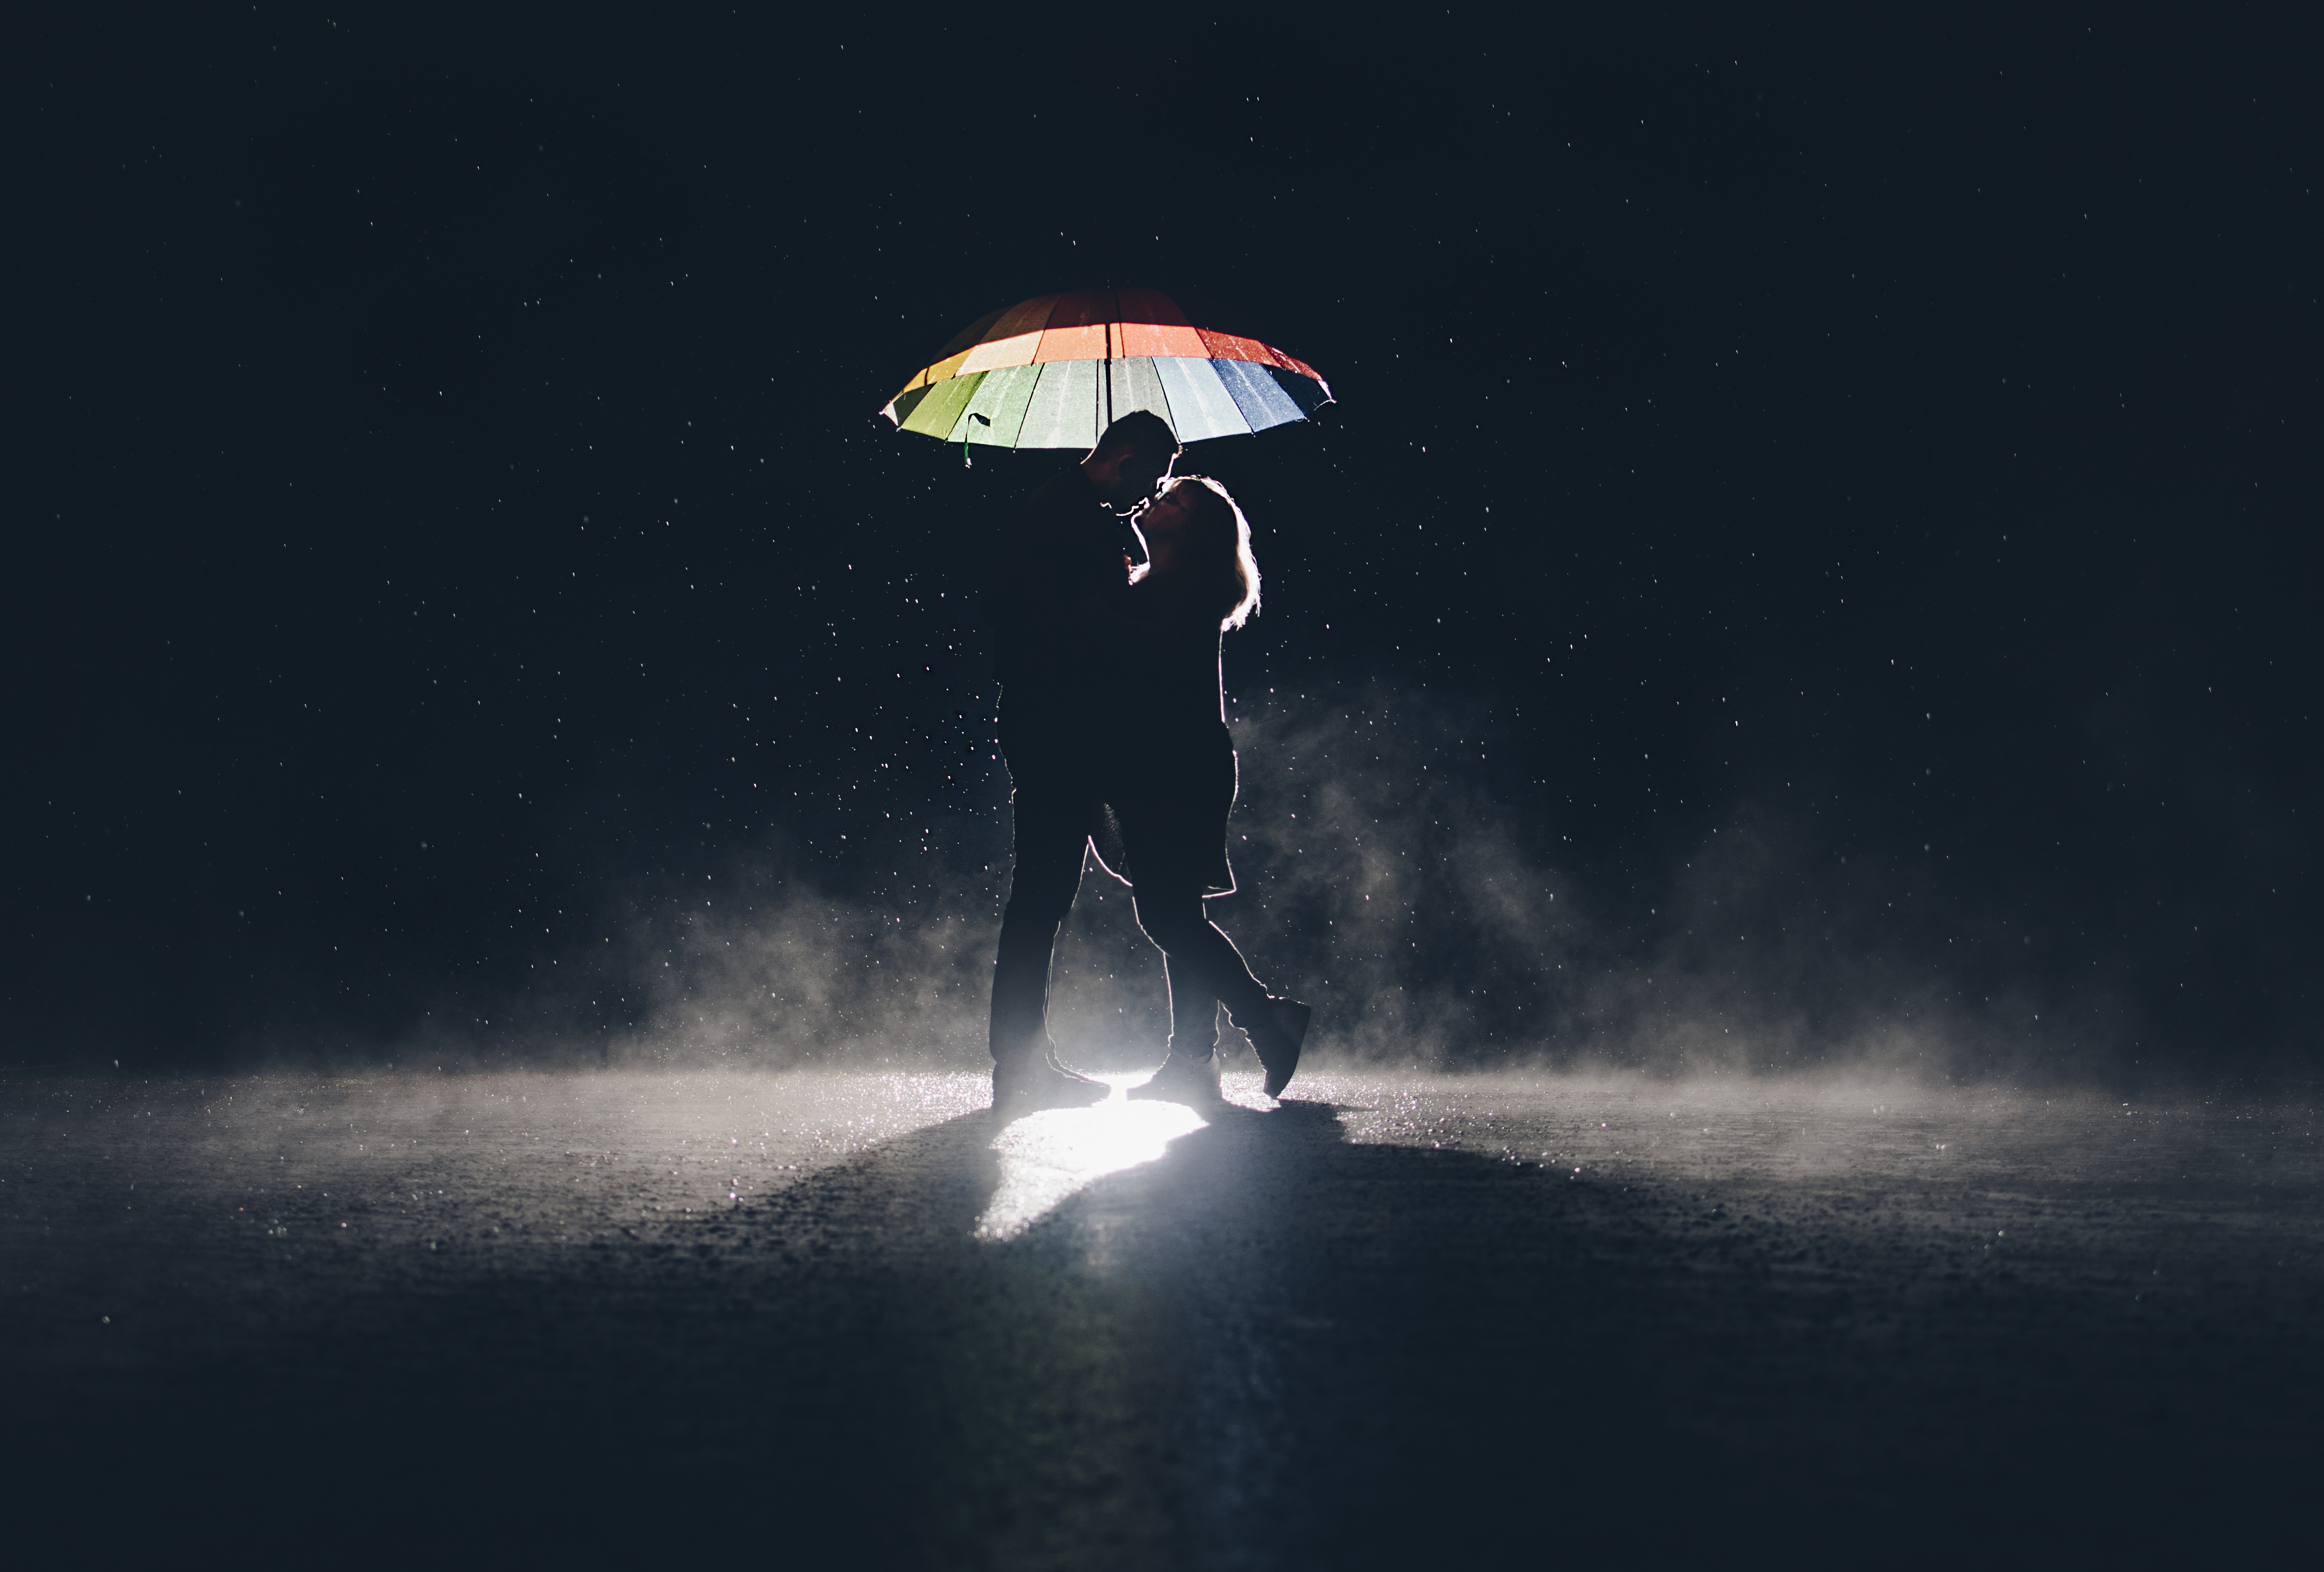 Wallpaper, action, adult, air, beauty, blue, business, businesswoman, Caucasian, challenge, colored, couple, crisis, darkness, drops, extreme, female, Flash, glare, happiness, kiss, light, love, lovers, man, multi, night, ocean, overcome, people, Person